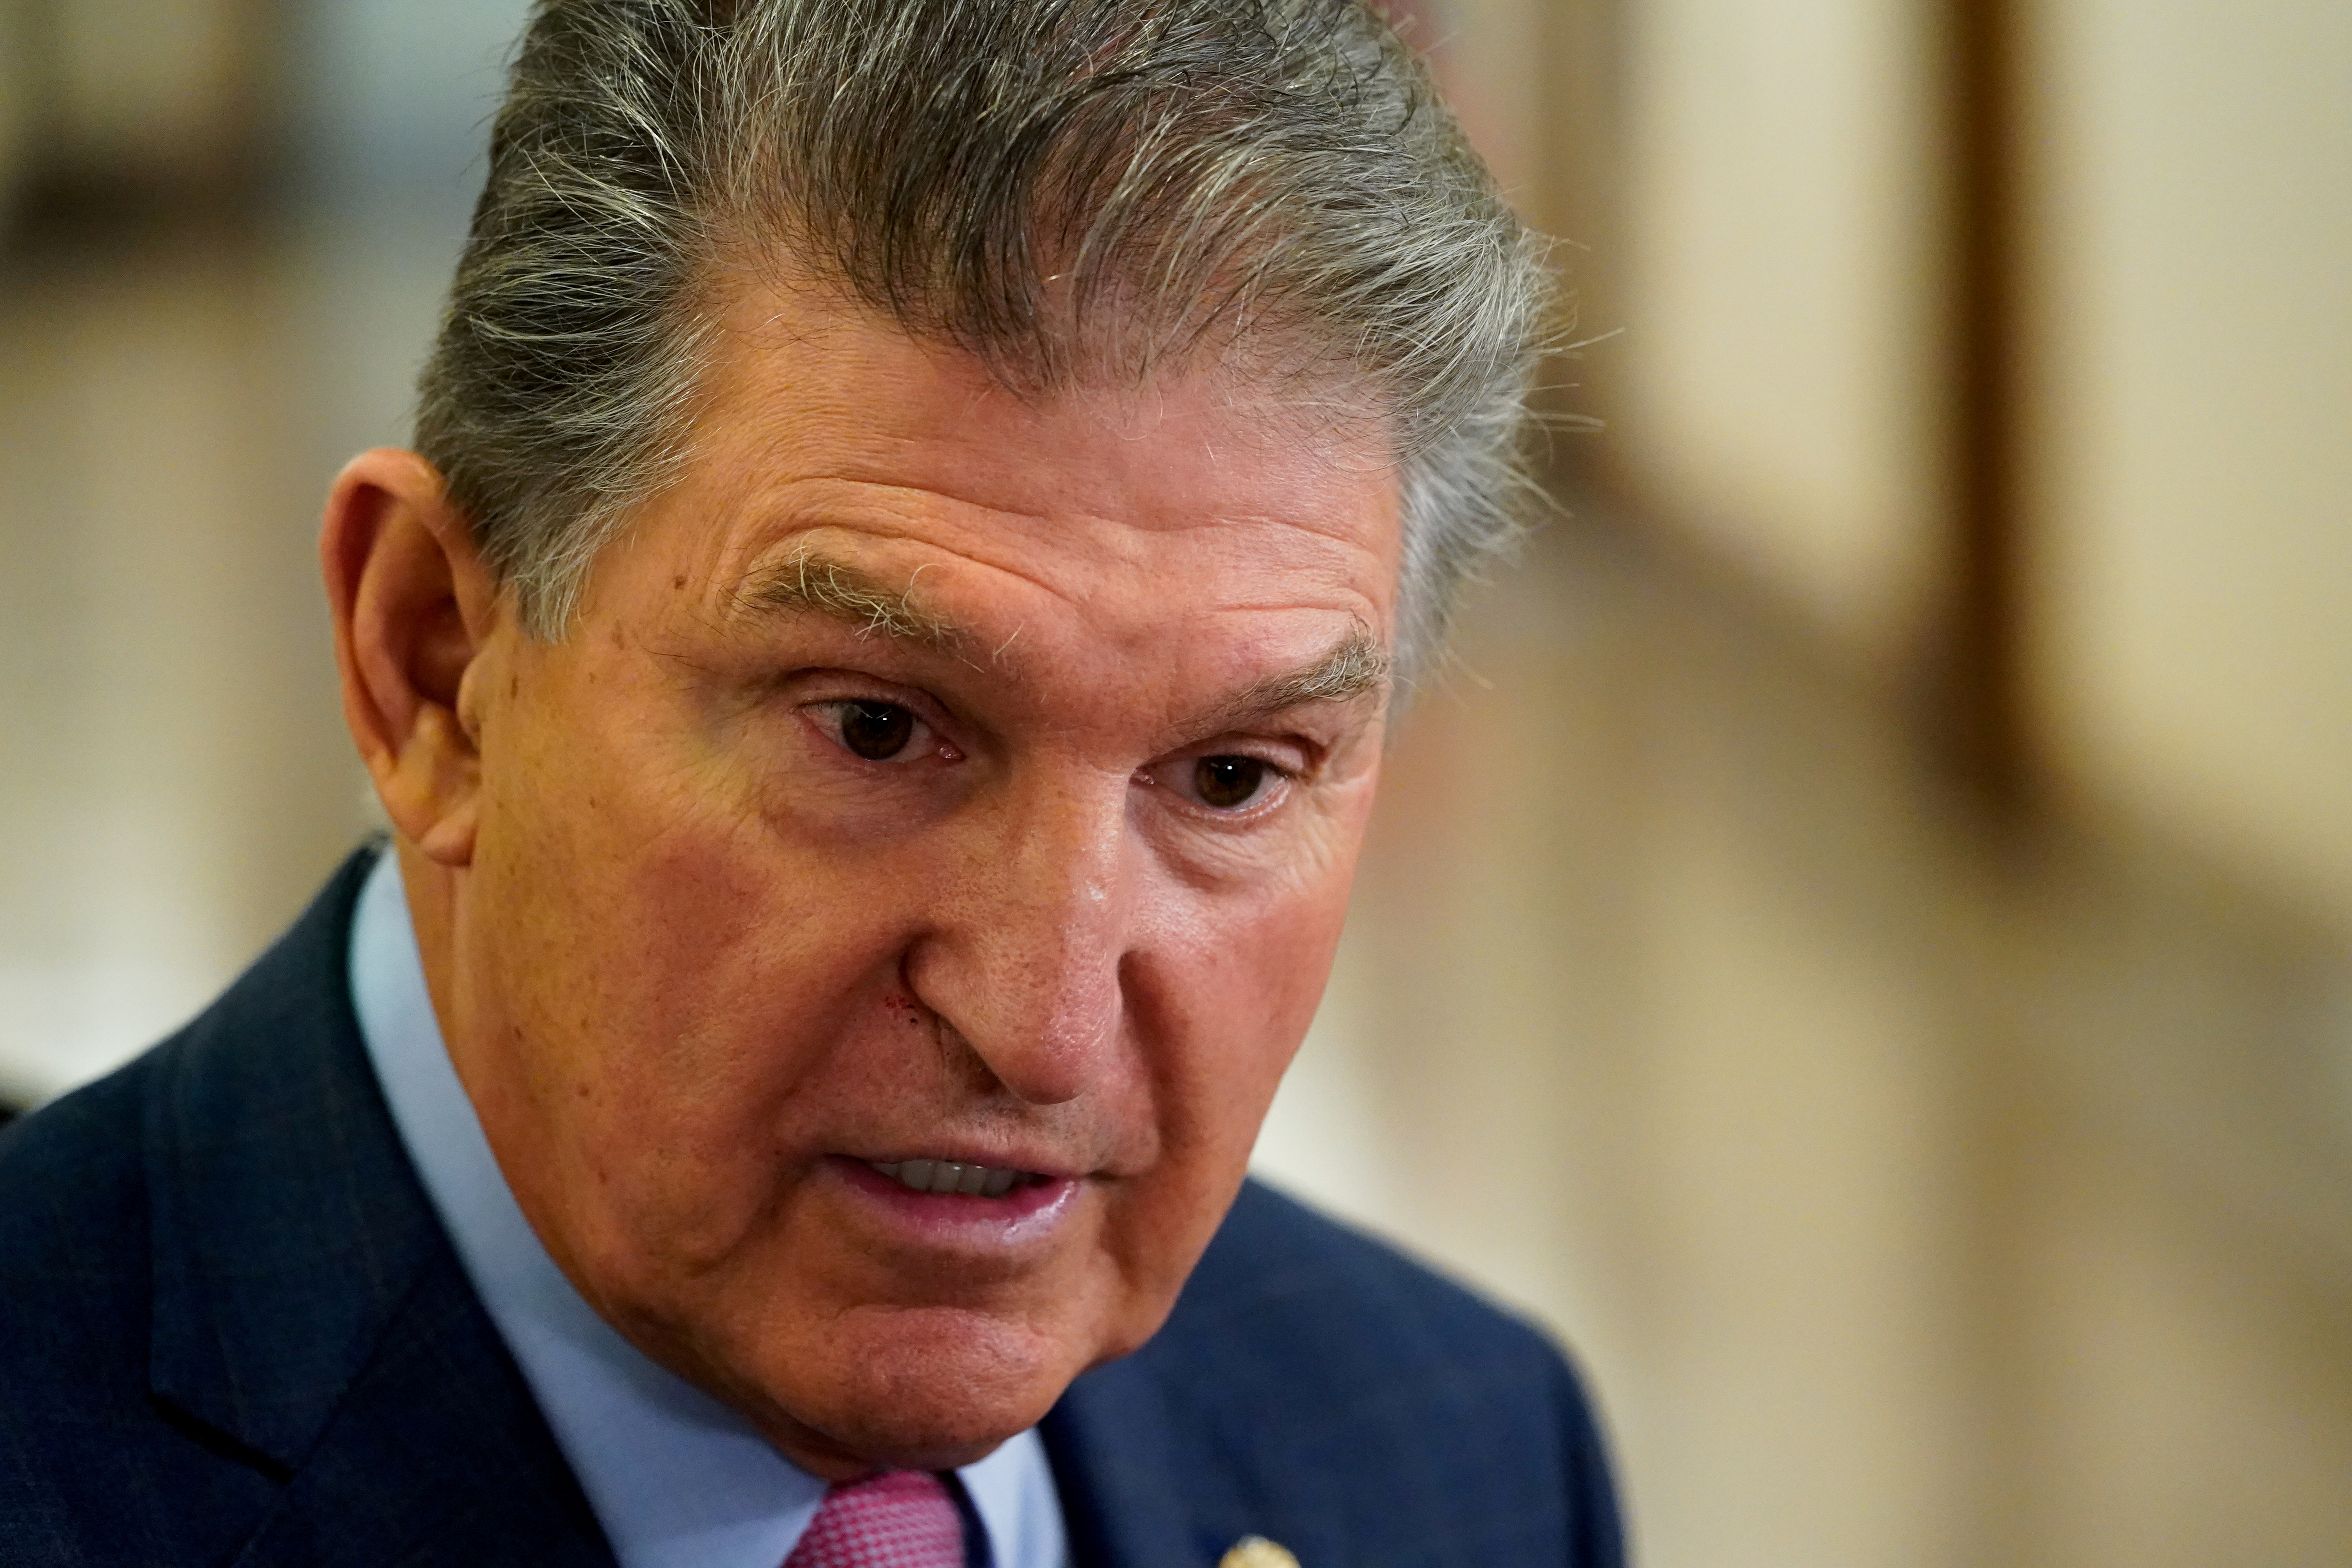 U.S. Senator Joe Manchin (D-WV) talks to reporters before the start of a Senate Energy and Natural Resources Committee hearing on Capitol Hill in Washington